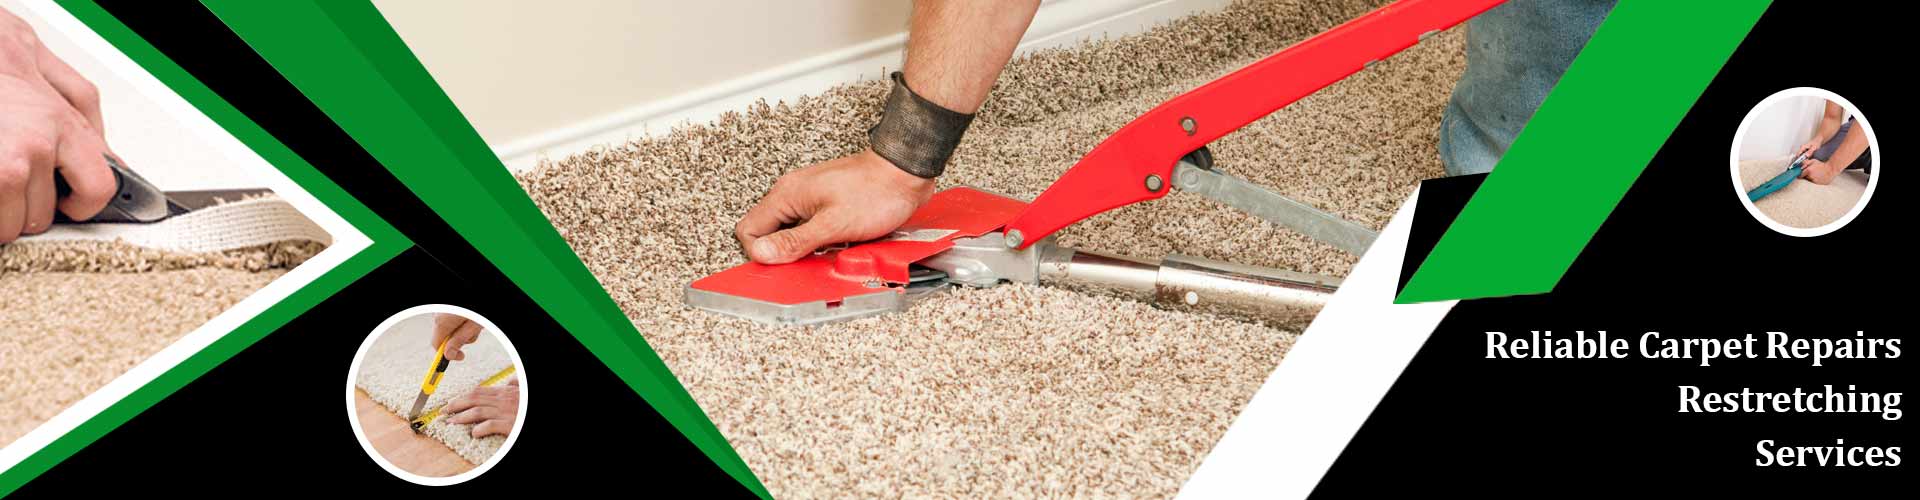 Carpet Repair and Restretching Services